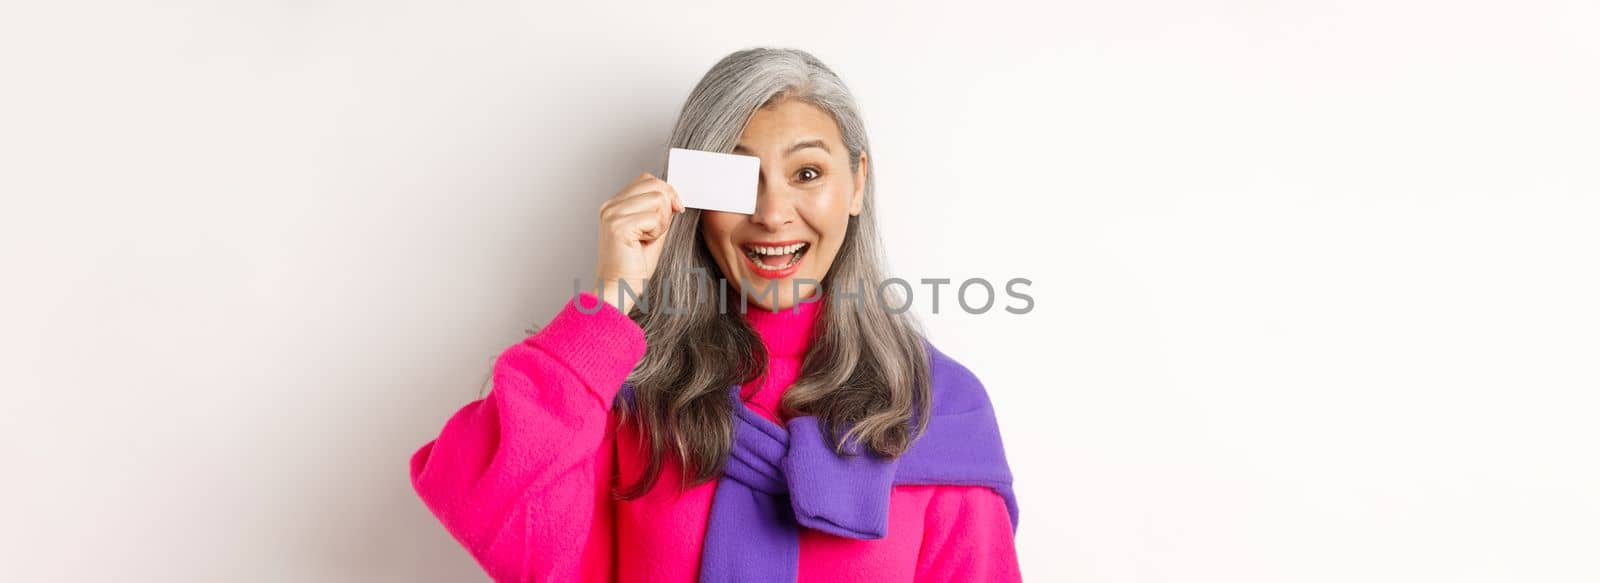 Shopping concept. Stylish asian senior woman smiling and showing plastic credit card, paying contactless, standing over white background.